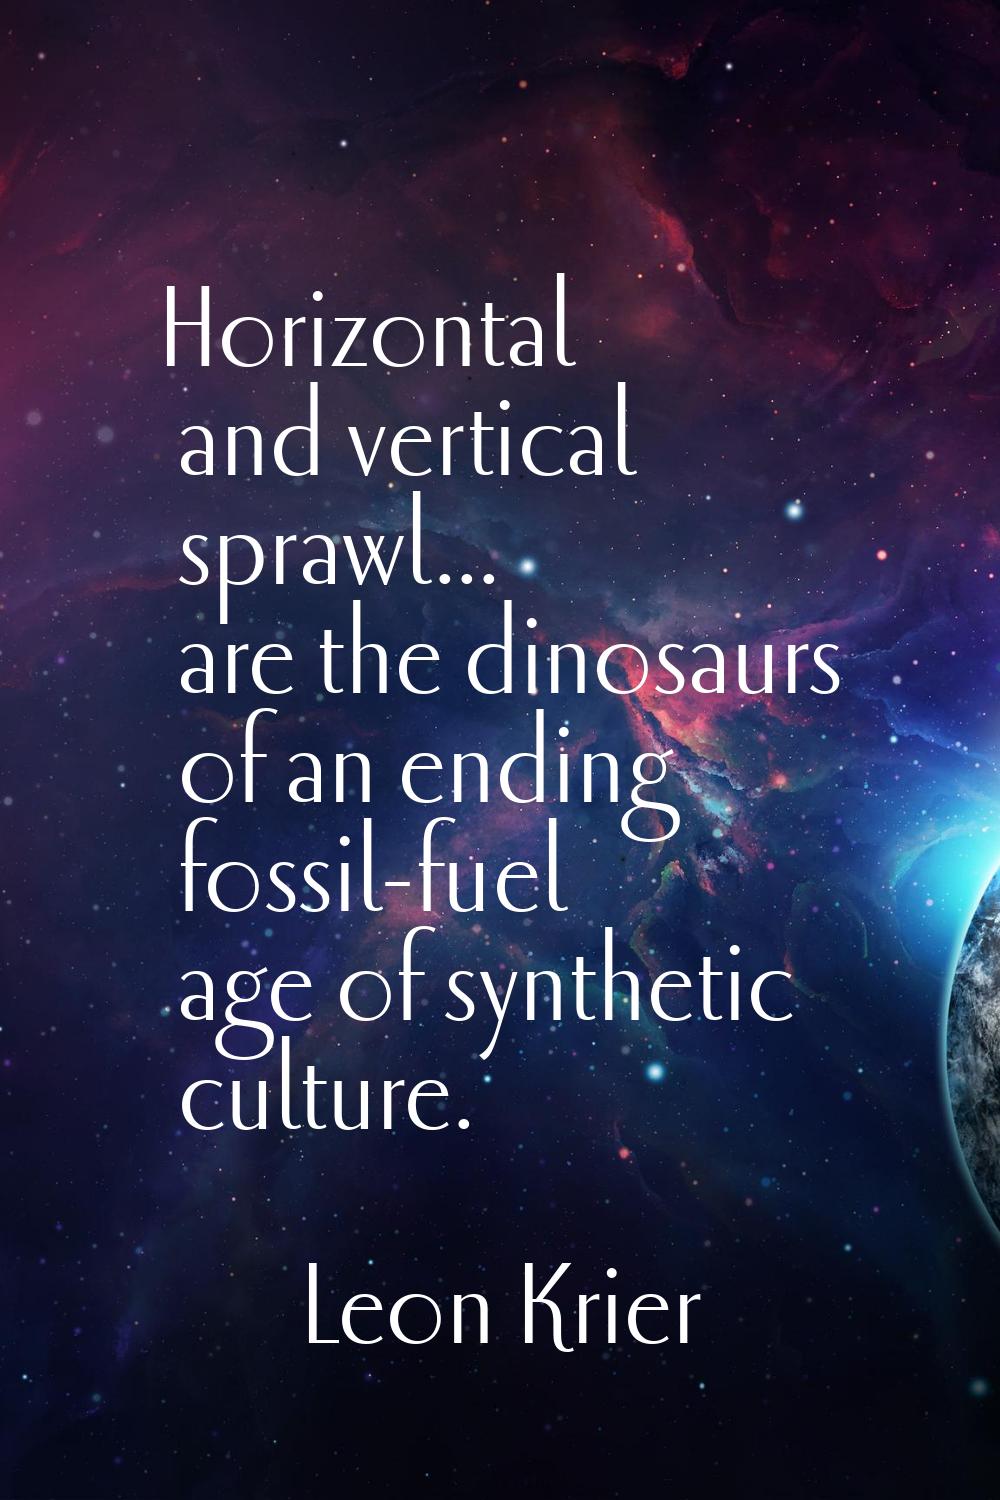 Horizontal and vertical sprawl... are the dinosaurs of an ending fossil-fuel age of synthetic cultu